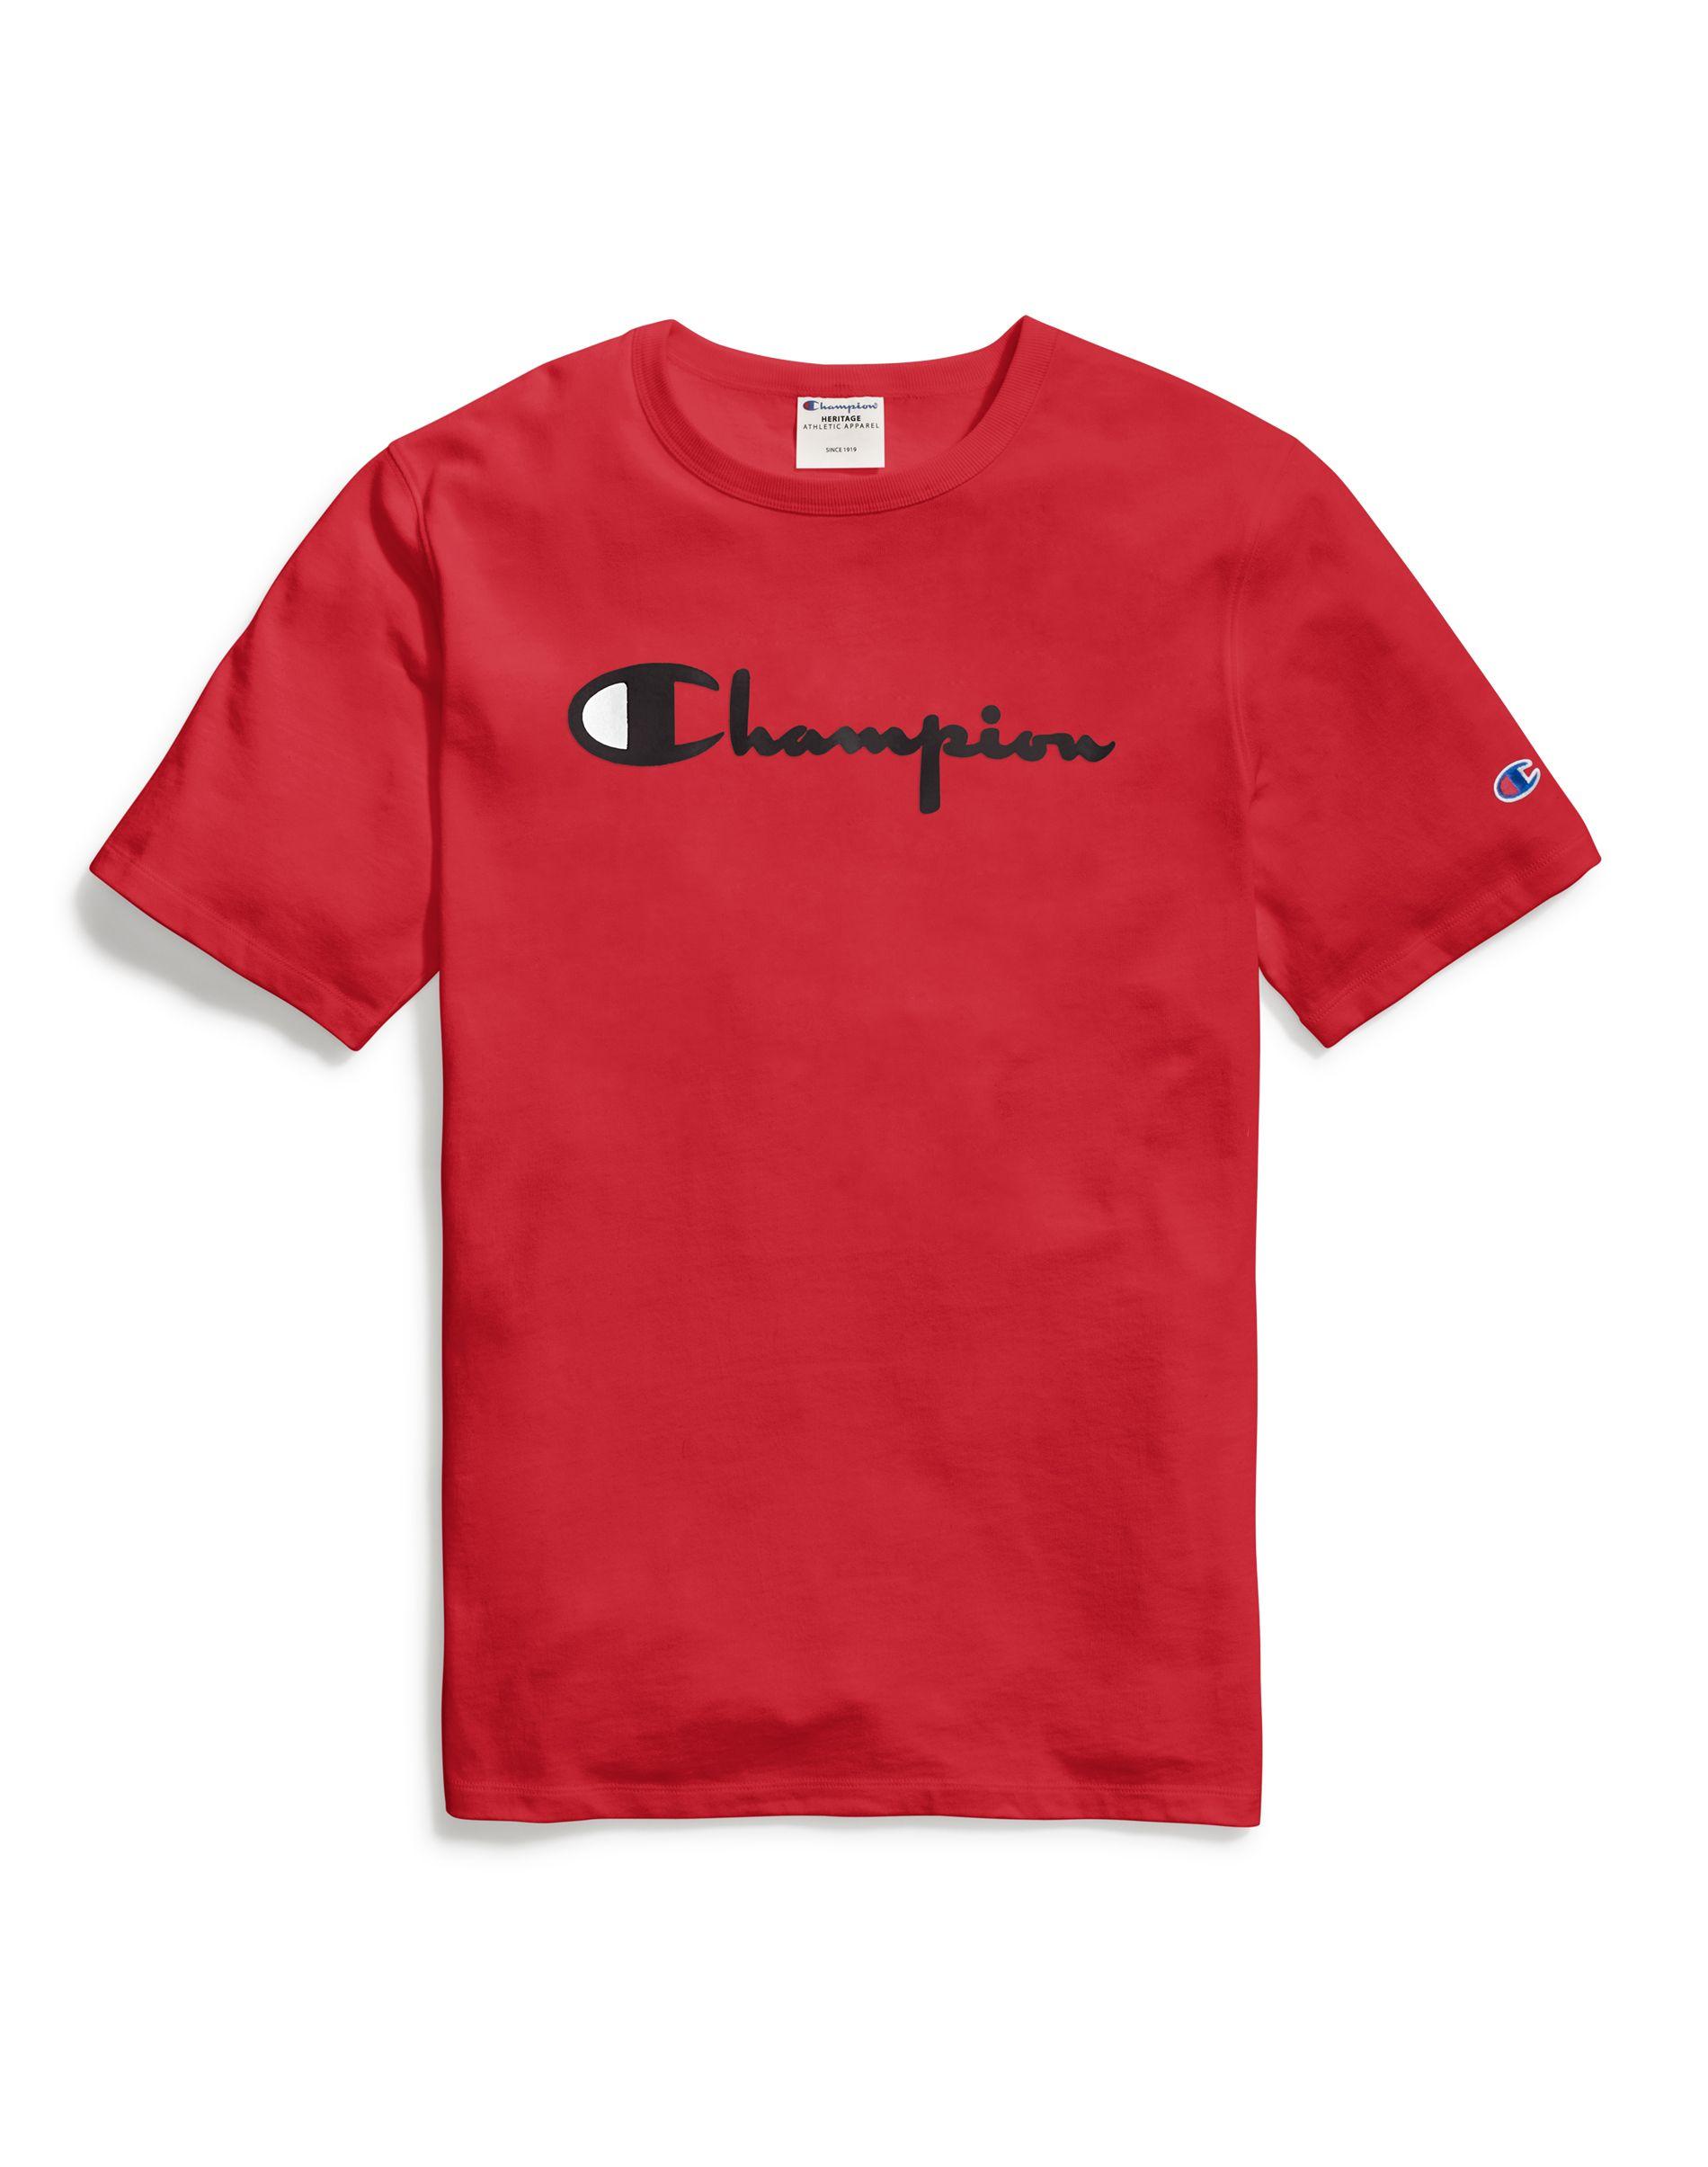 Heritage Tee, Flock 90s Logo in Red for 